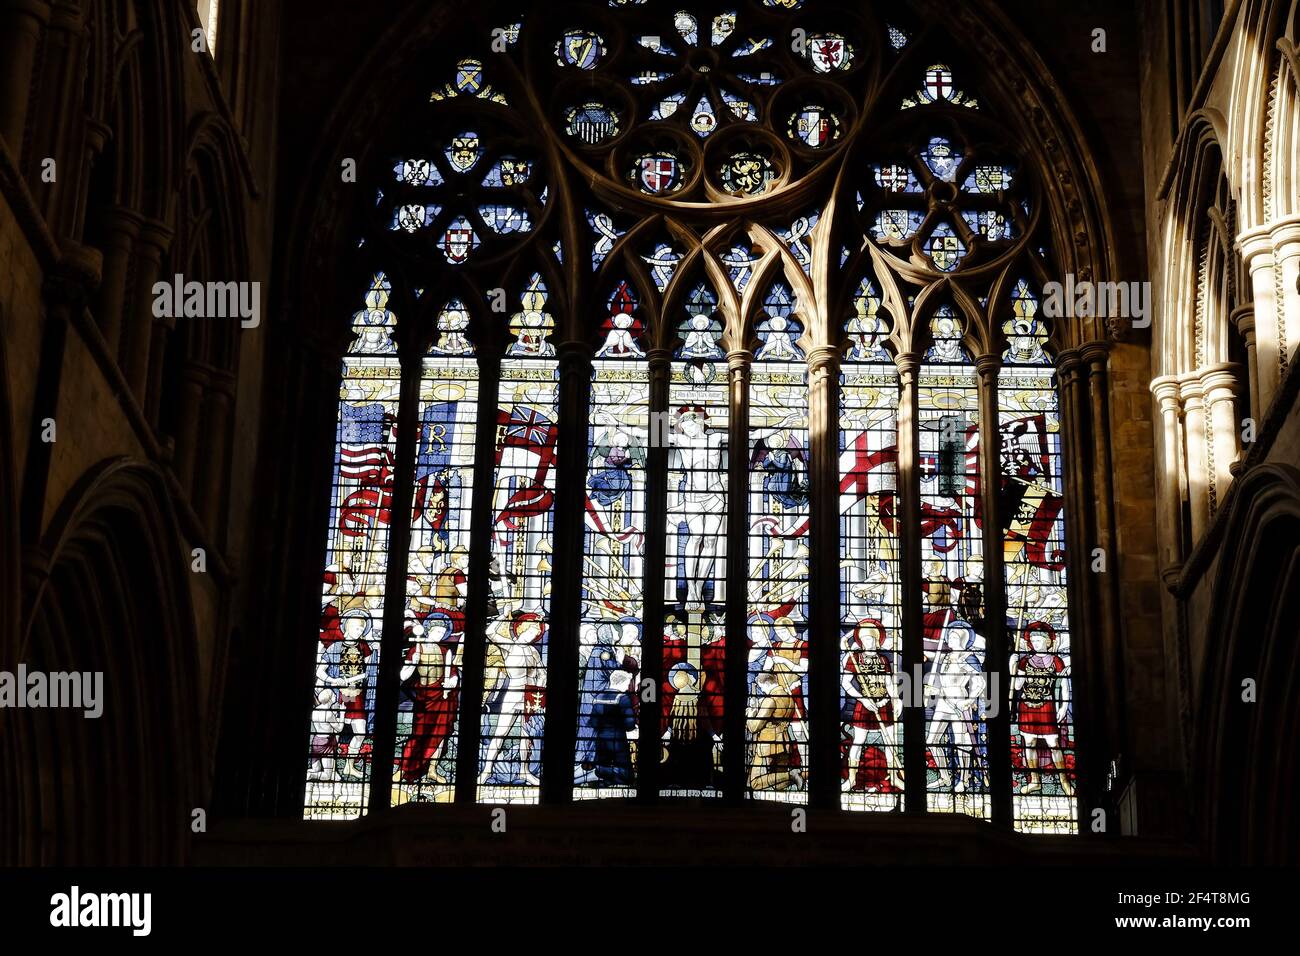 ST. ALBANS, UNITED KINGDOM - Nov 19, 2017: Stained glass window situated above the main west entrance to St. Albans Cathedral in St. Albans, UK. Stock Photo